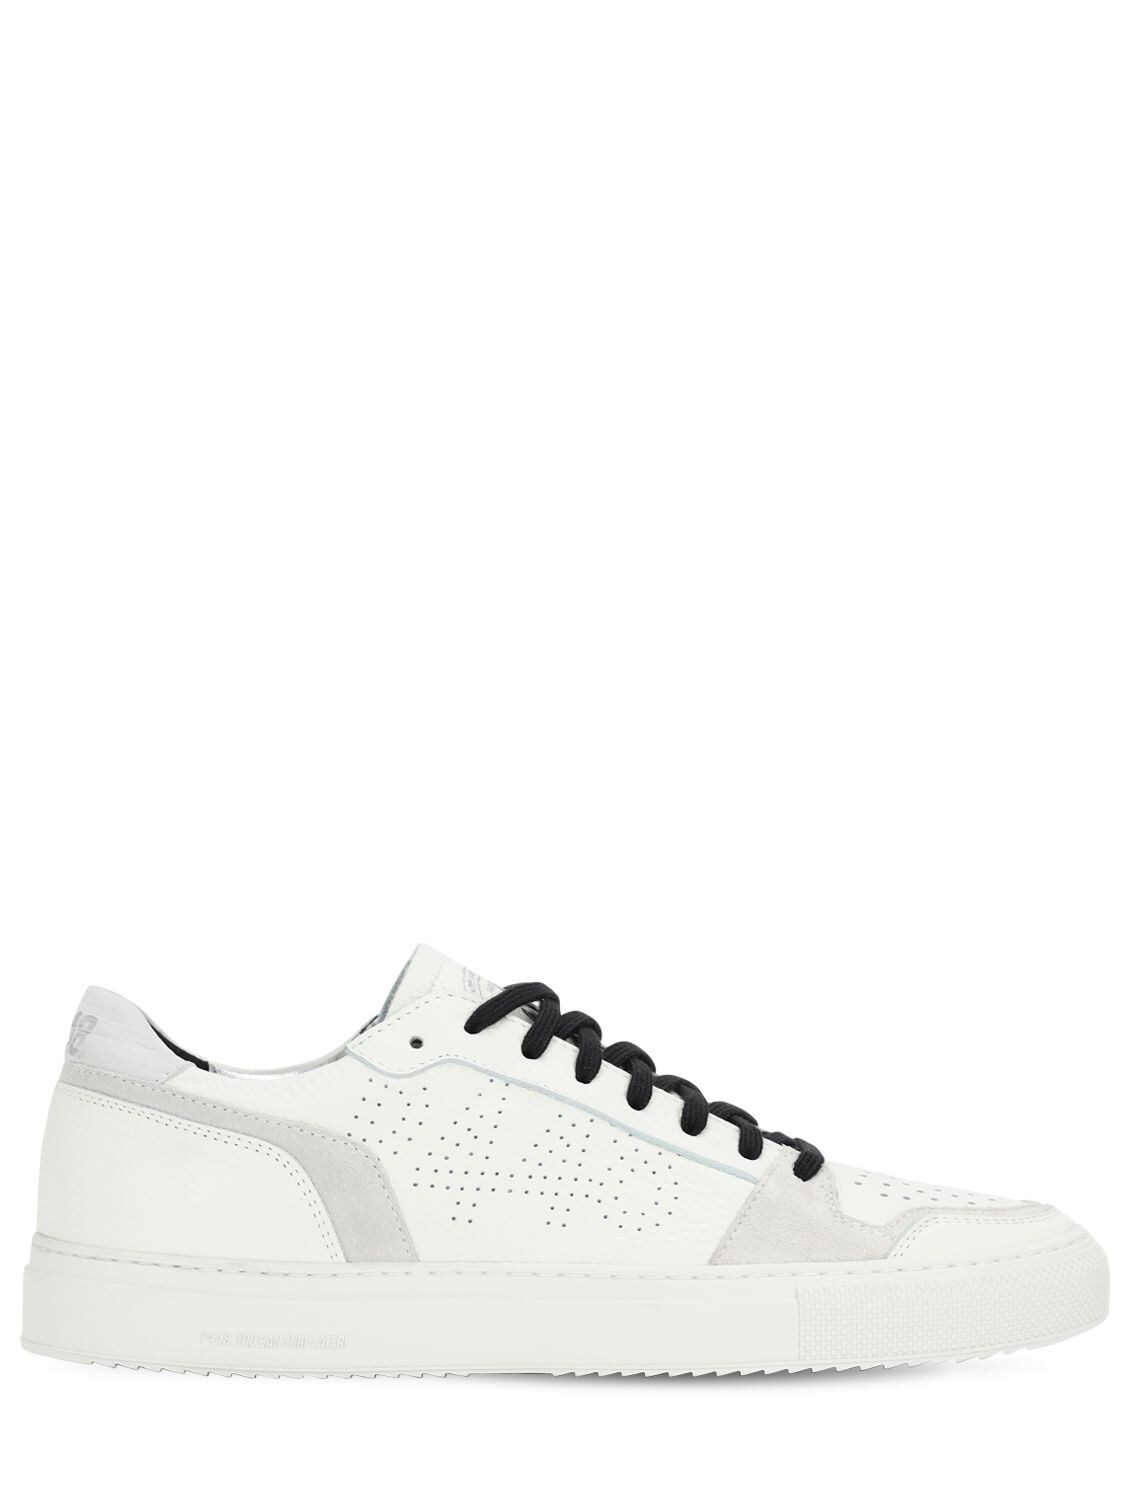 P448 Zac Leather & Suede Low Top Sneakers In White,grey | ModeSens